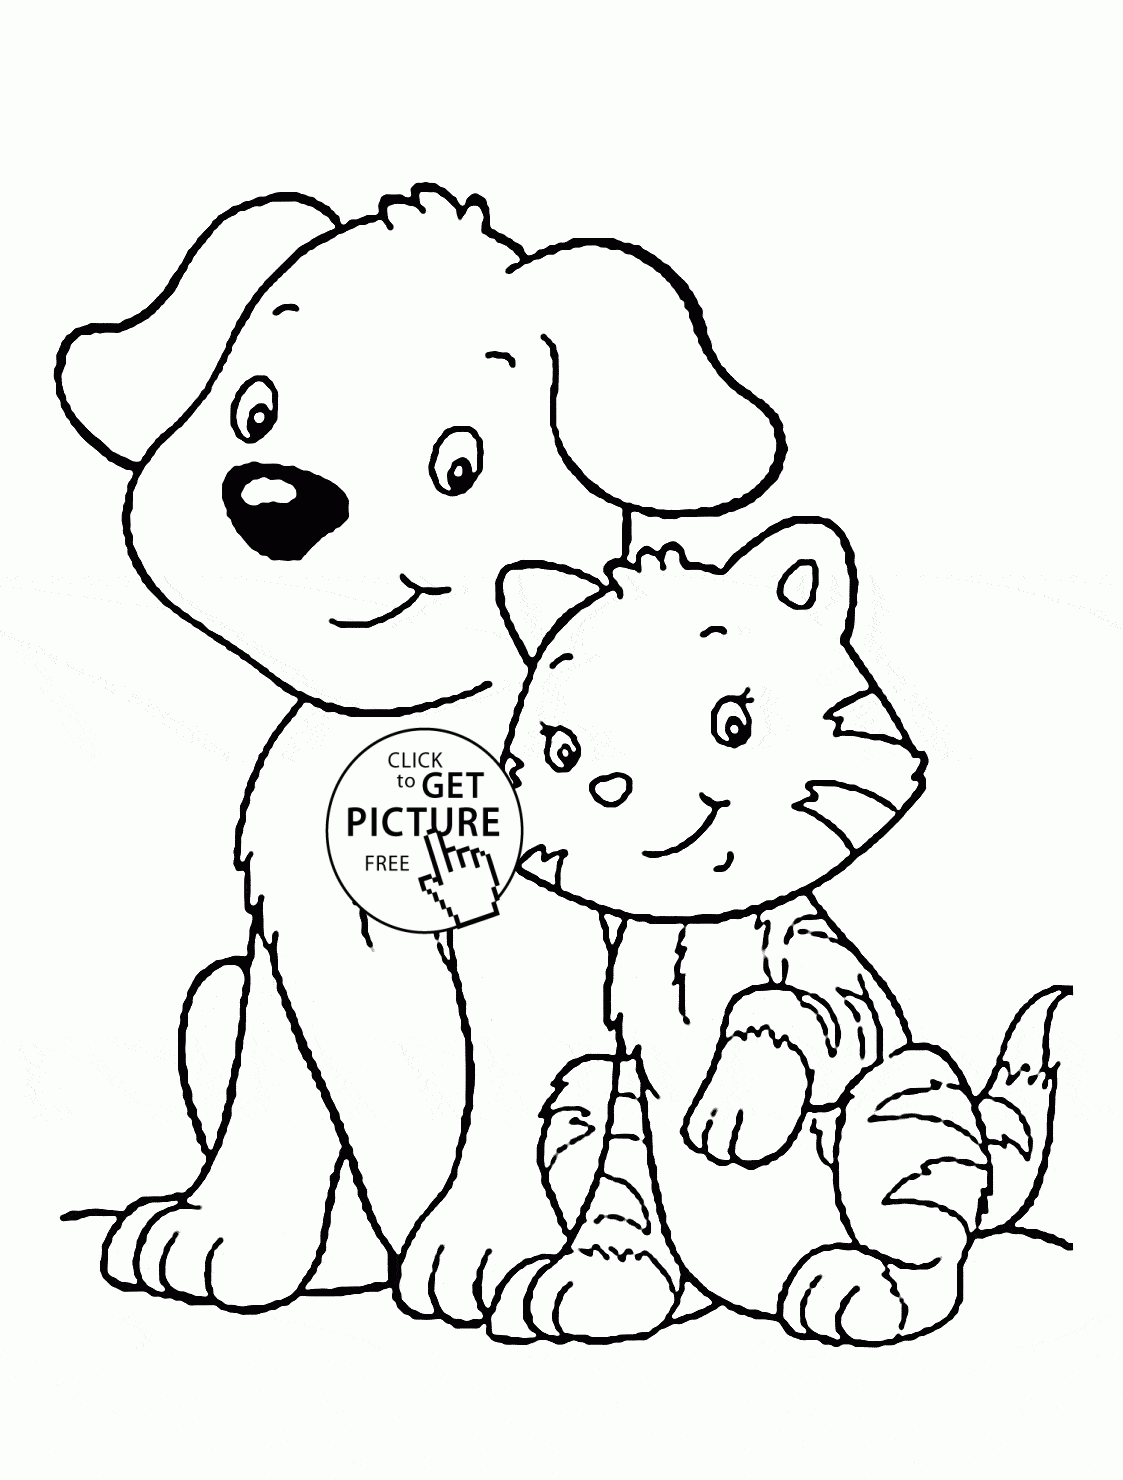 Cat And Dog Coloring Page For Kids Animal Coloring Pages Printables 